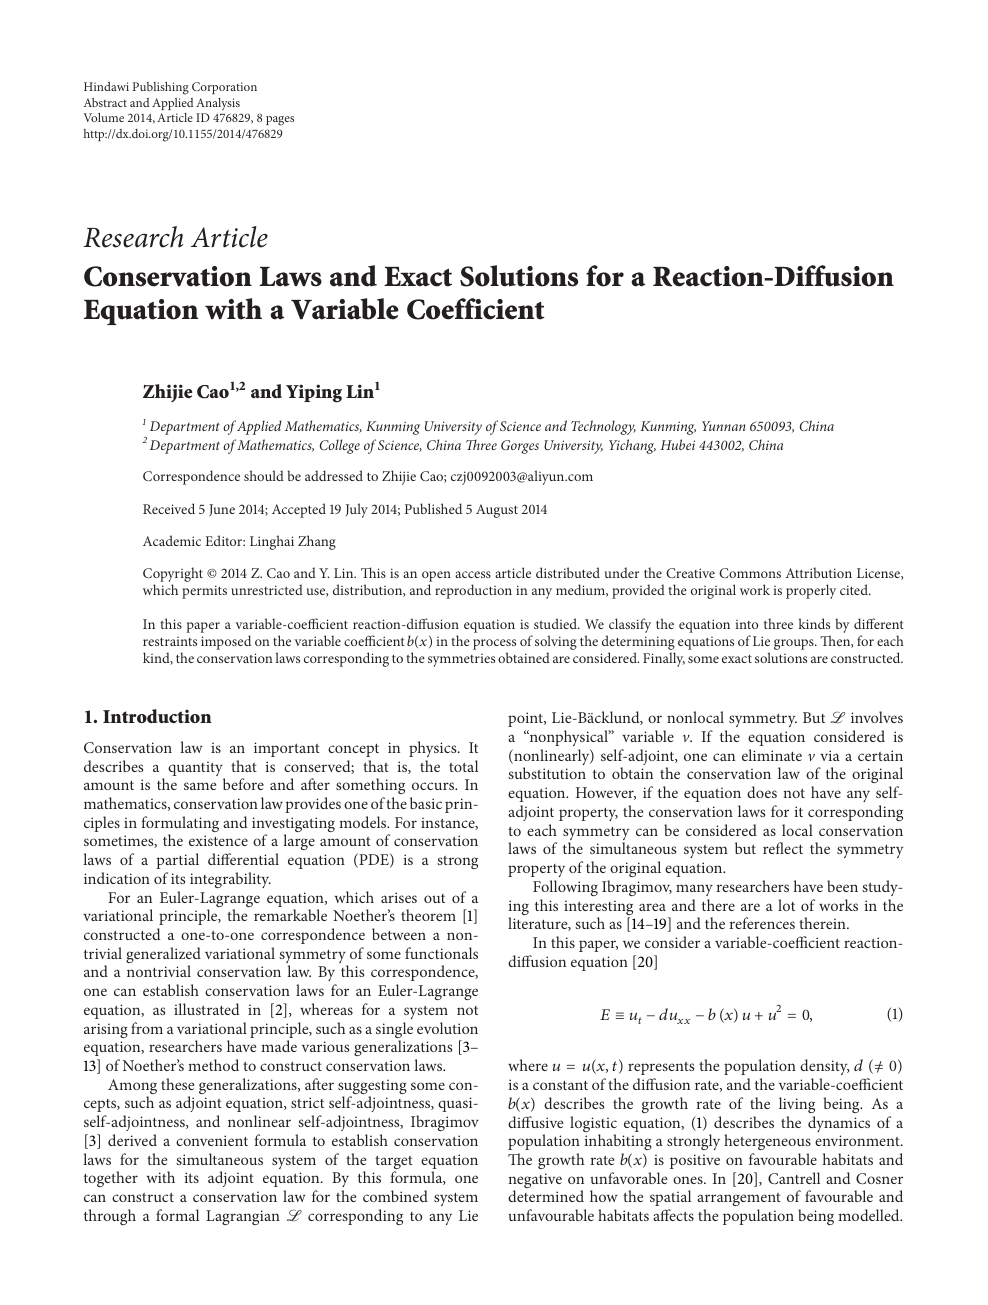 Conservation Laws And Exact Solutions For A Reaction Diffusion Equation With A Variable Coefficient Topic Of Research Paper In Mathematics Download Scholarly Article Pdf And Read For Free On Cyberleninka Open Science